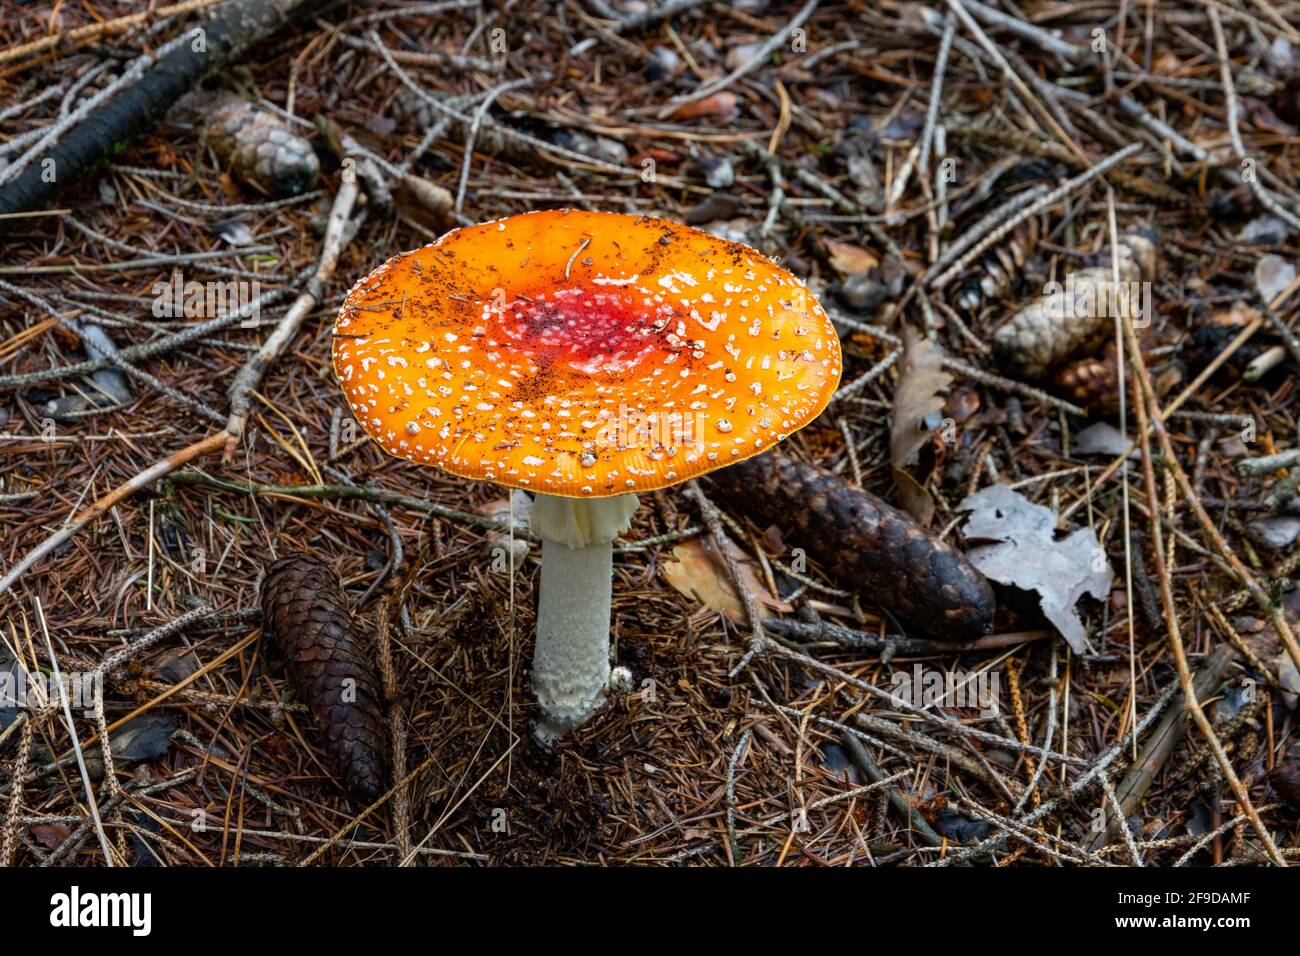 The red poisonous mushroom boletus in the forest Stock Photo